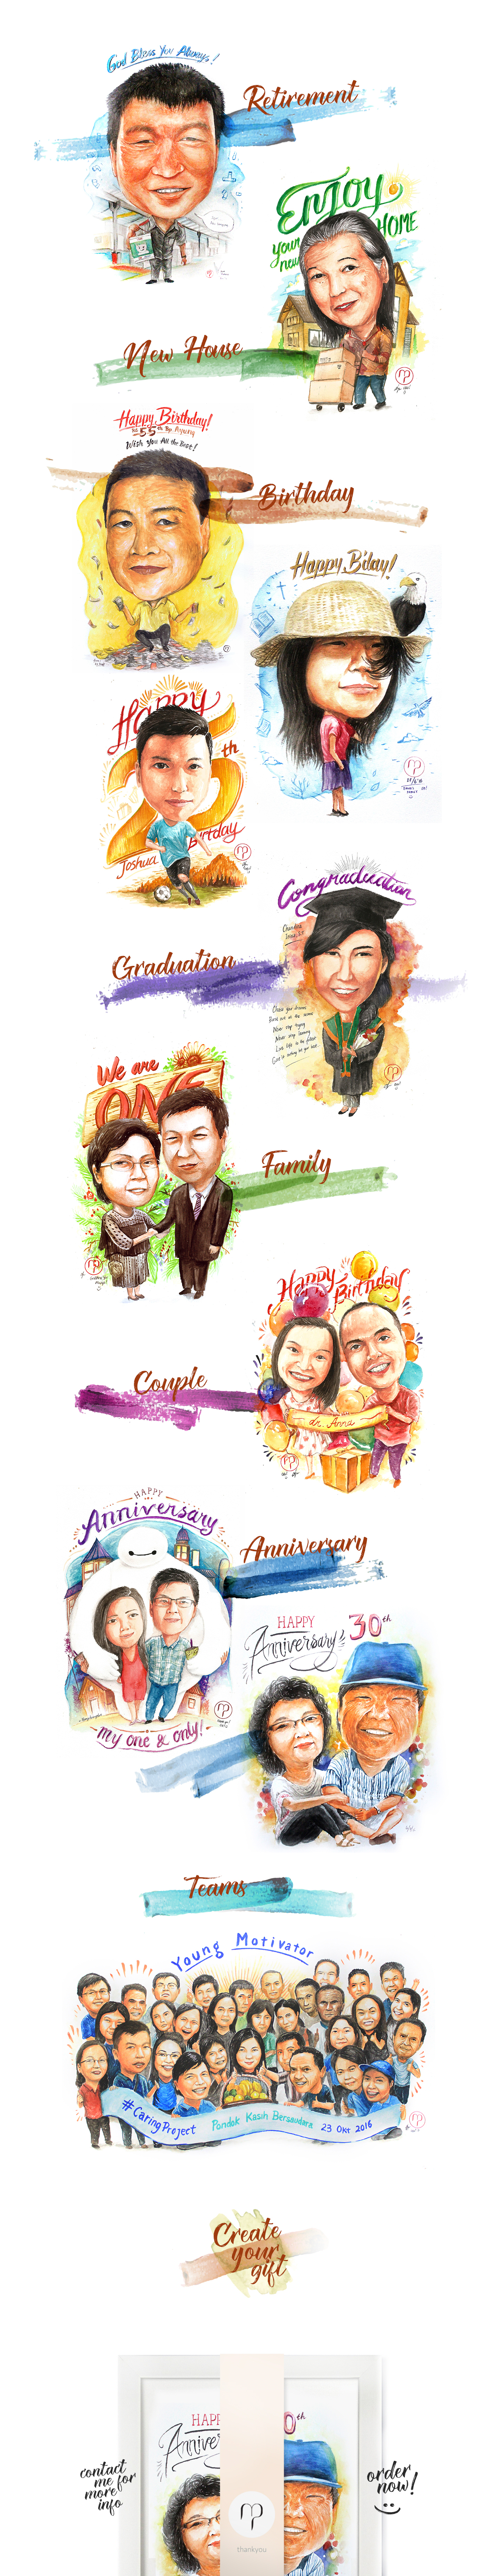 art caricatures drawings watercolor sketch people family friends anniversary Birthday